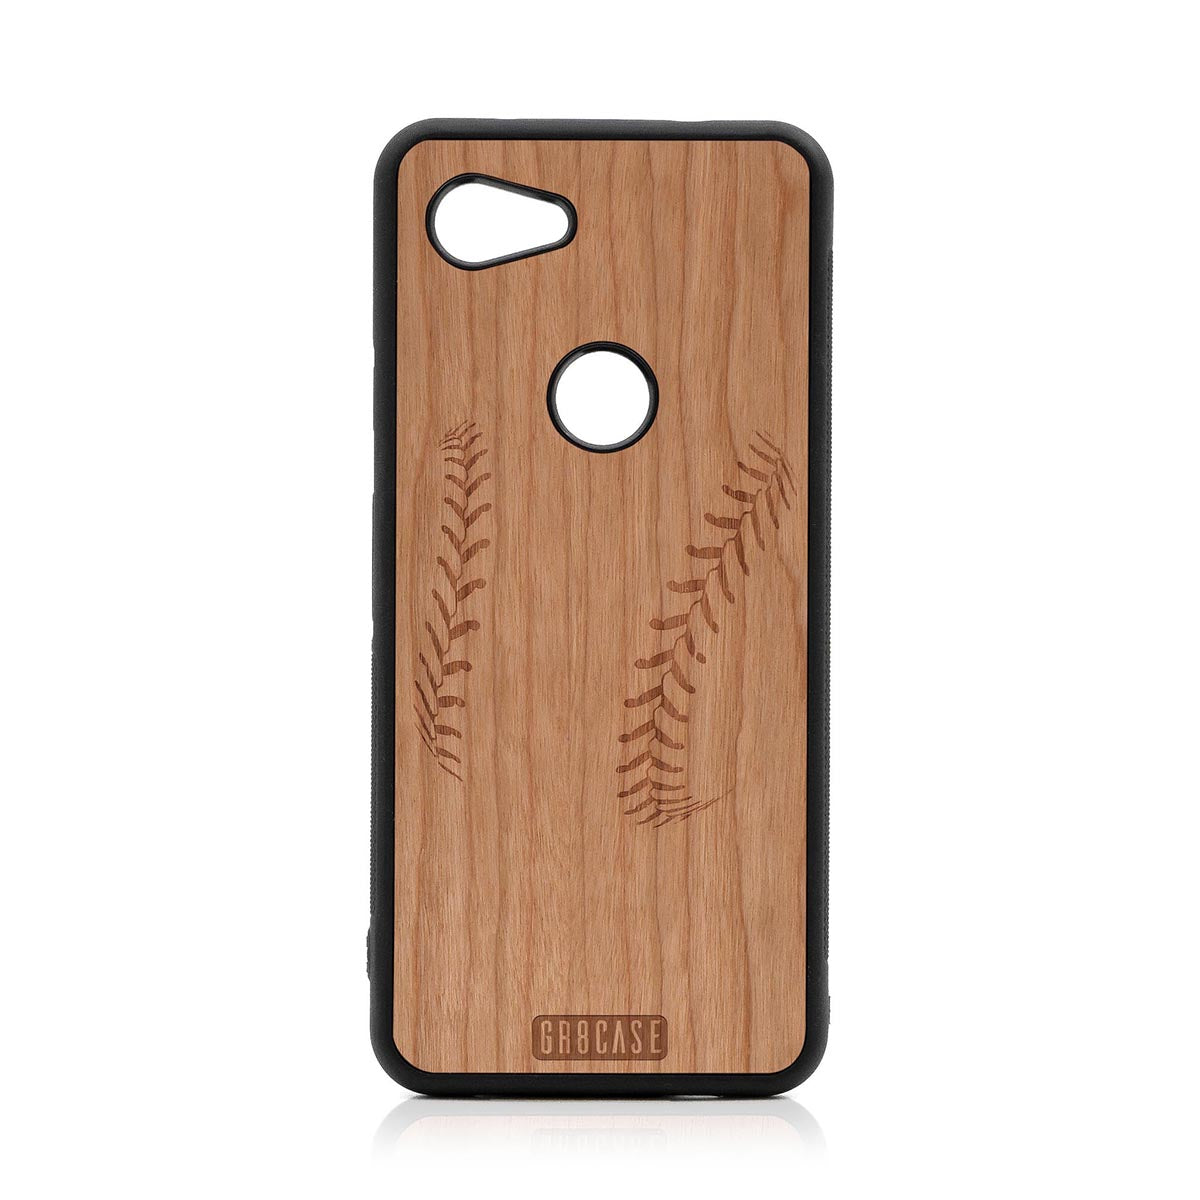 Baseball Stitches Design Wood Case For Google Pixel 3A XL by GR8CASE